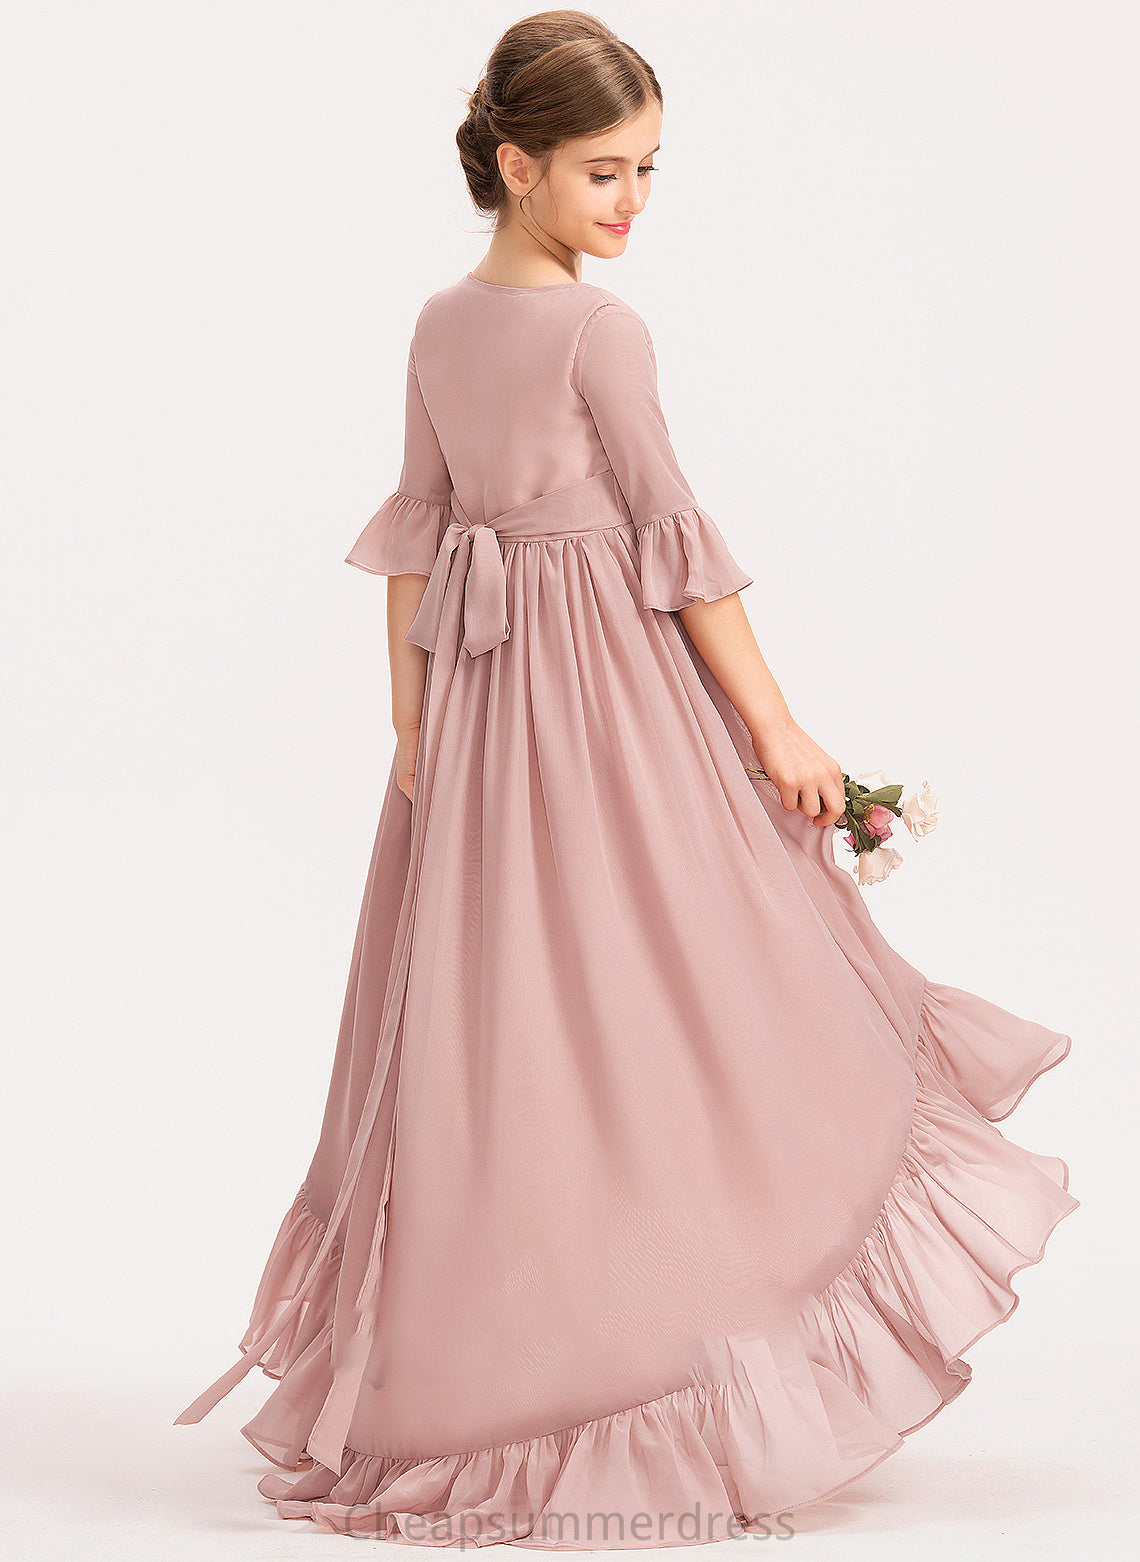 With Chiffon Ruffles A-Line Bow(s) Asymmetrical Phoebe Junior Bridesmaid Dresses Scoop Neck Cascading